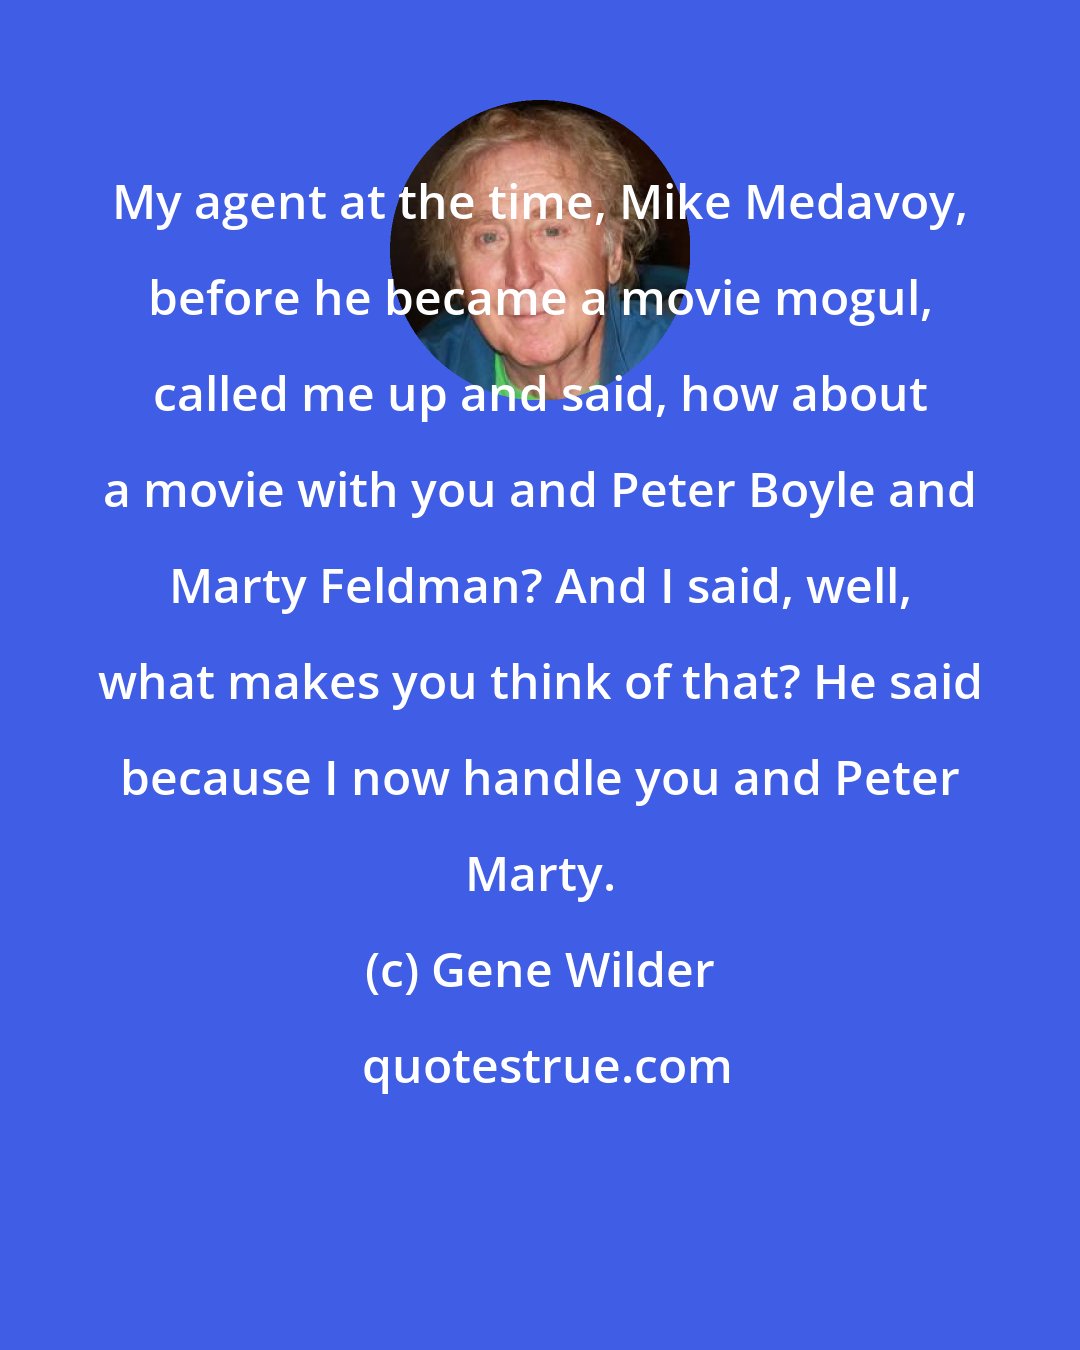 Gene Wilder: My agent at the time, Mike Medavoy, before he became a movie mogul, called me up and said, how about a movie with you and Peter Boyle and Marty Feldman? And I said, well, what makes you think of that? He said because I now handle you and Peter Marty.